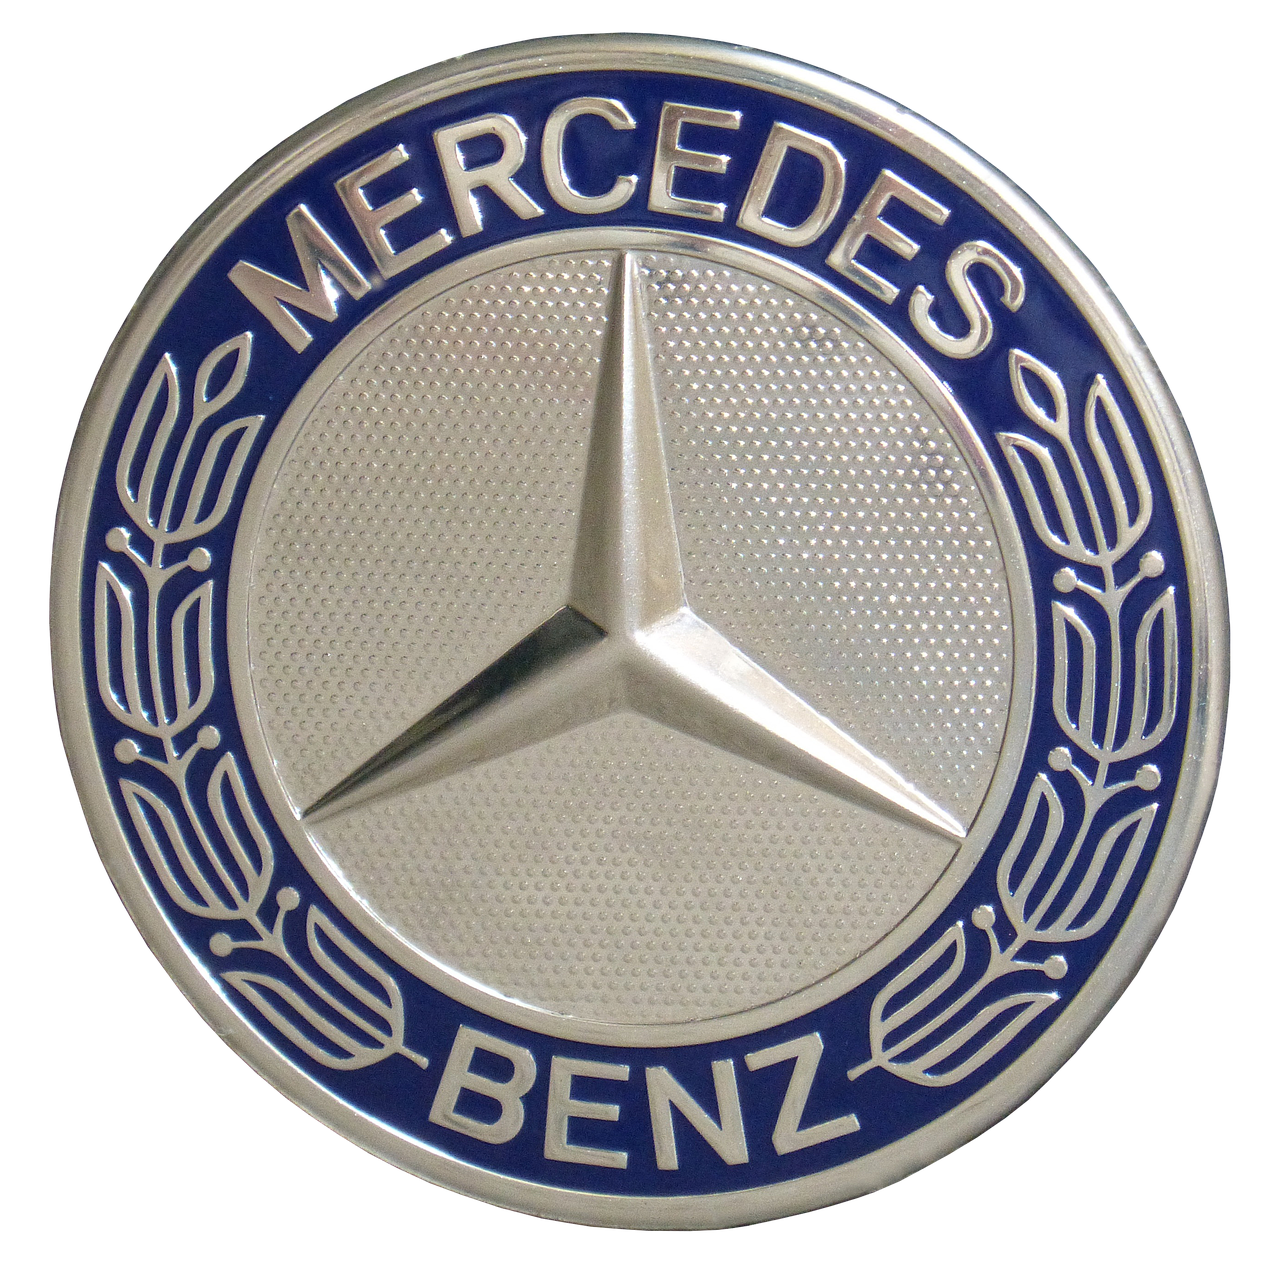 Mercedes benz,logo,brand,benz,star - free image from